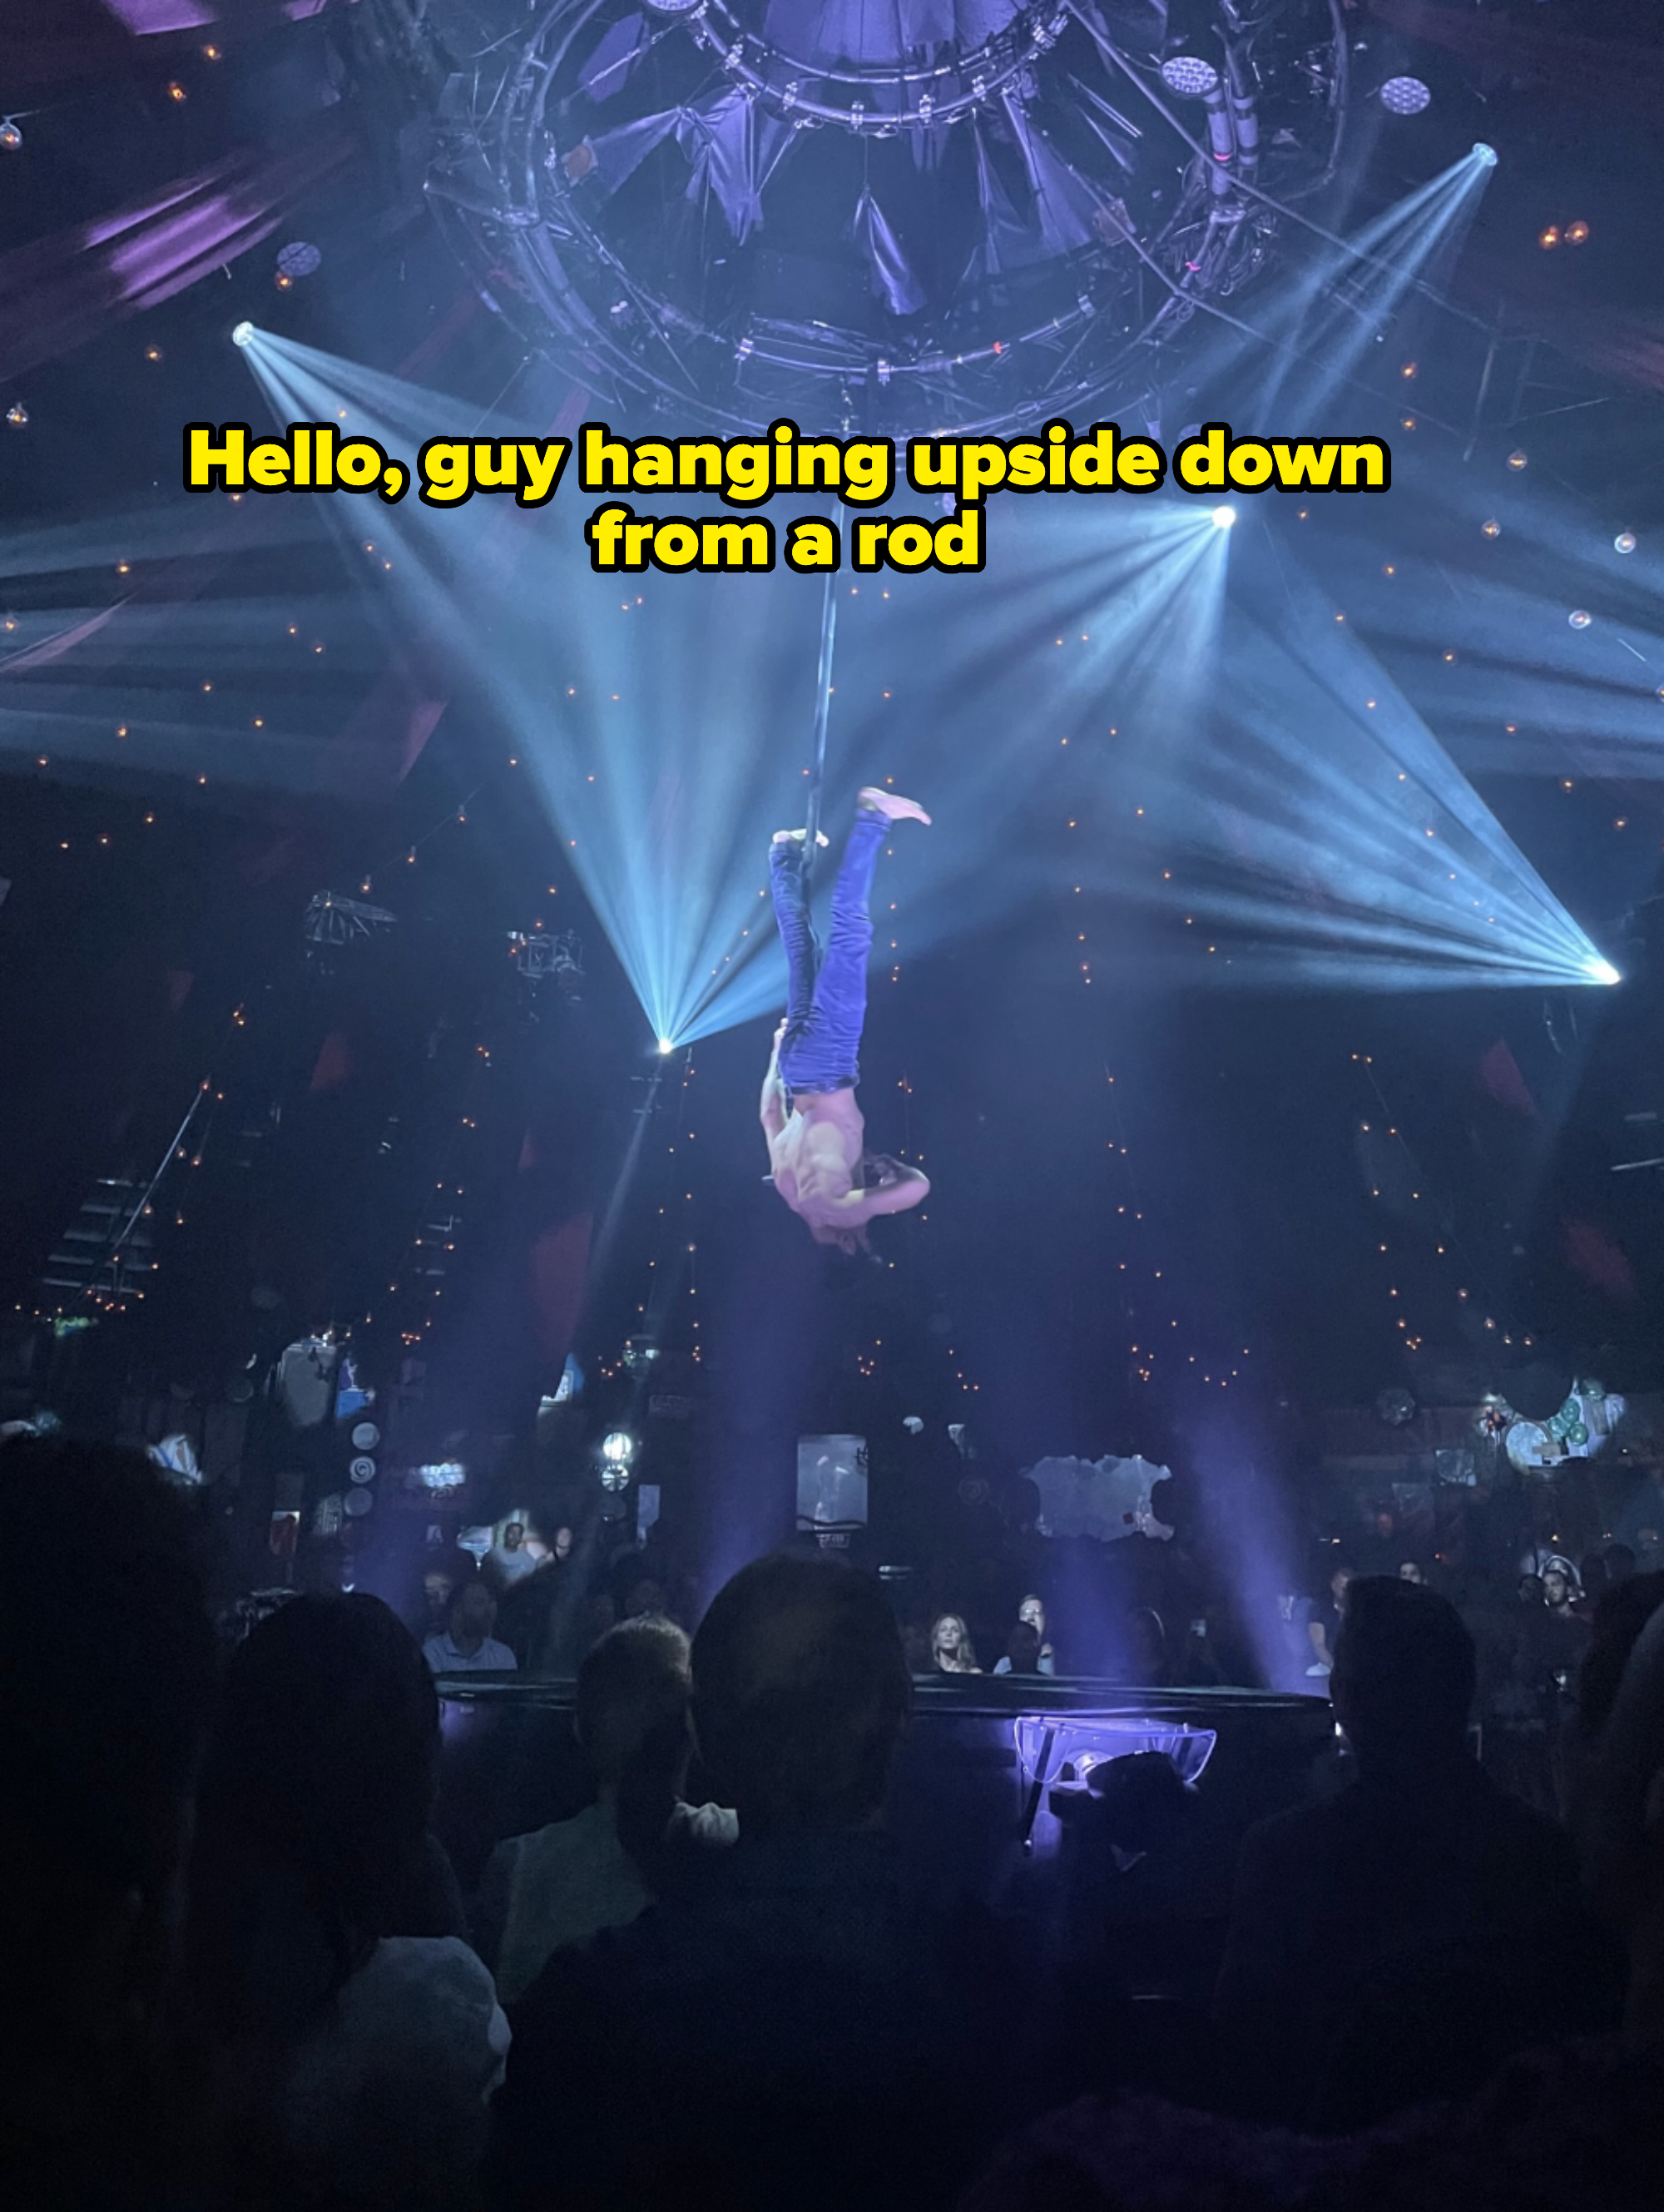 A guy from the Absinthe show hanging upside down from a rod